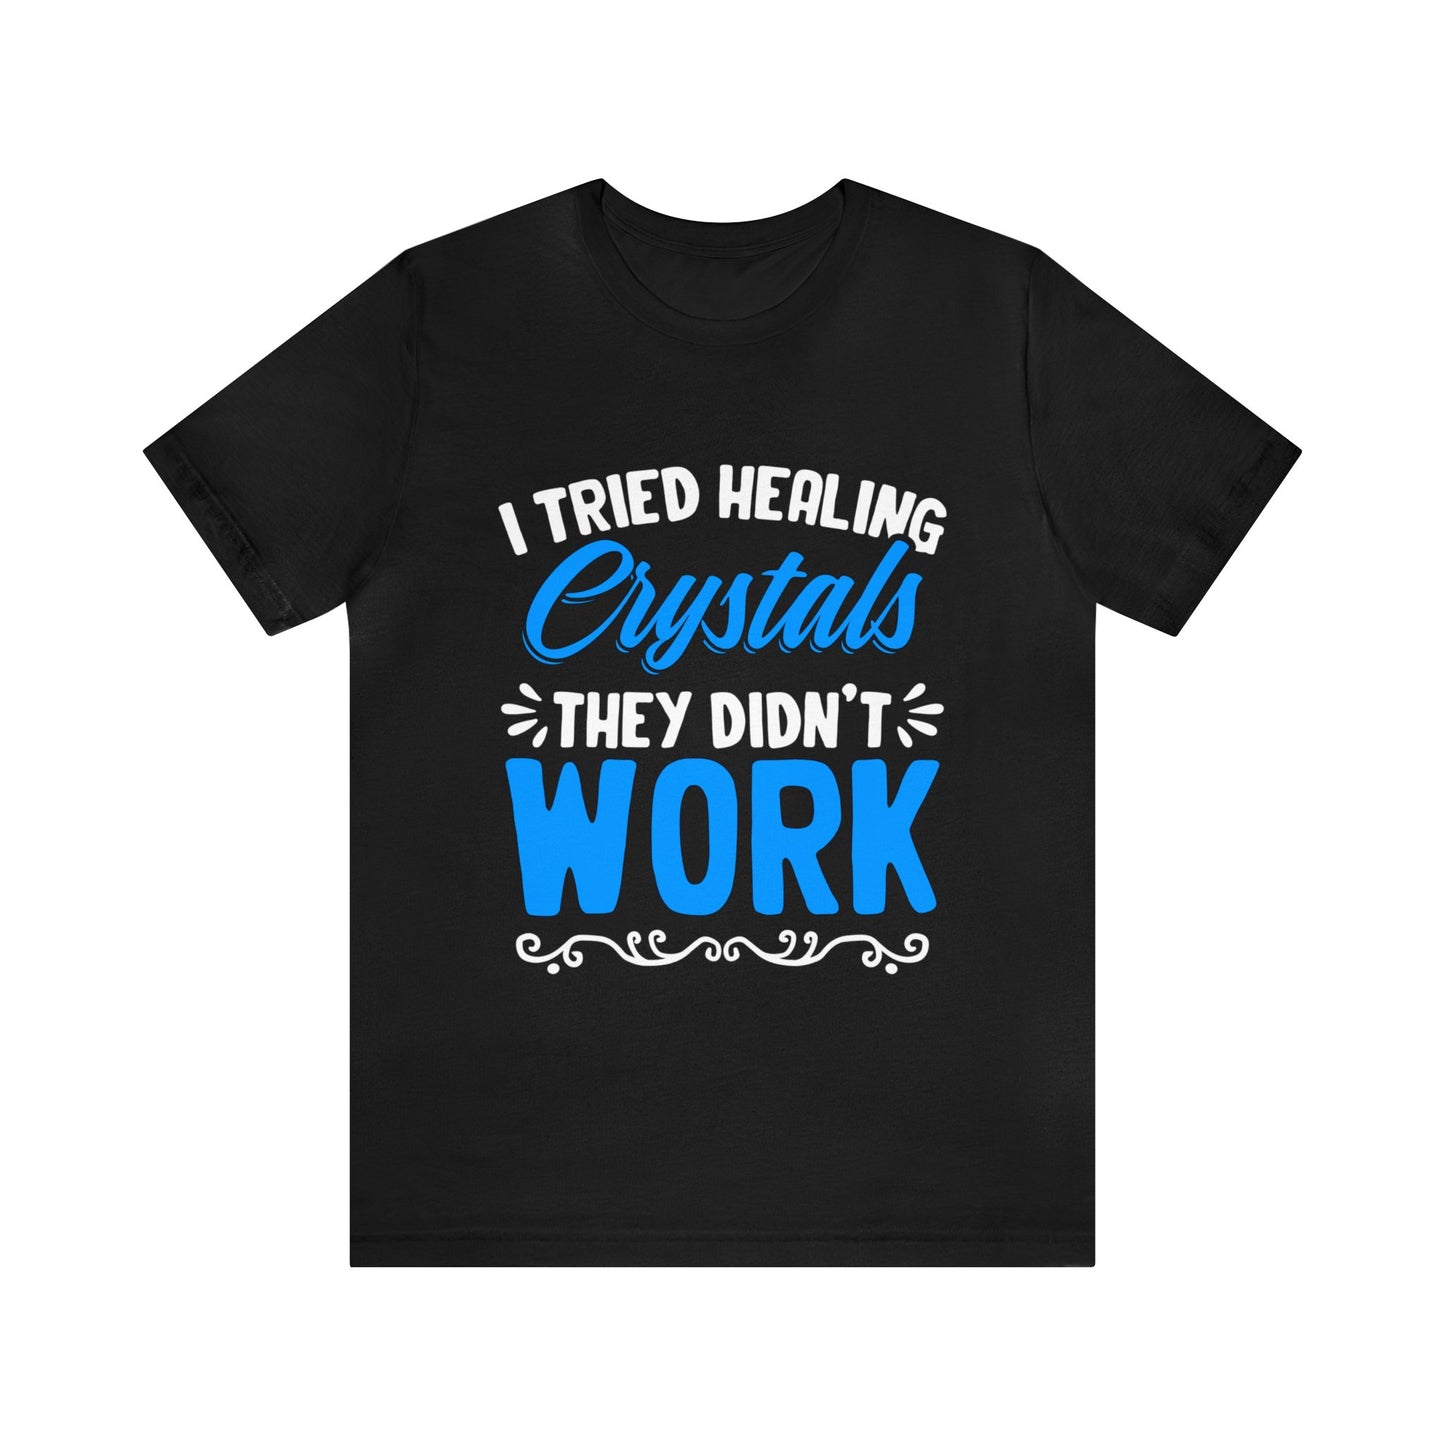 I Tried Healing Crystals They Didn't Work Unisex T-Shirt